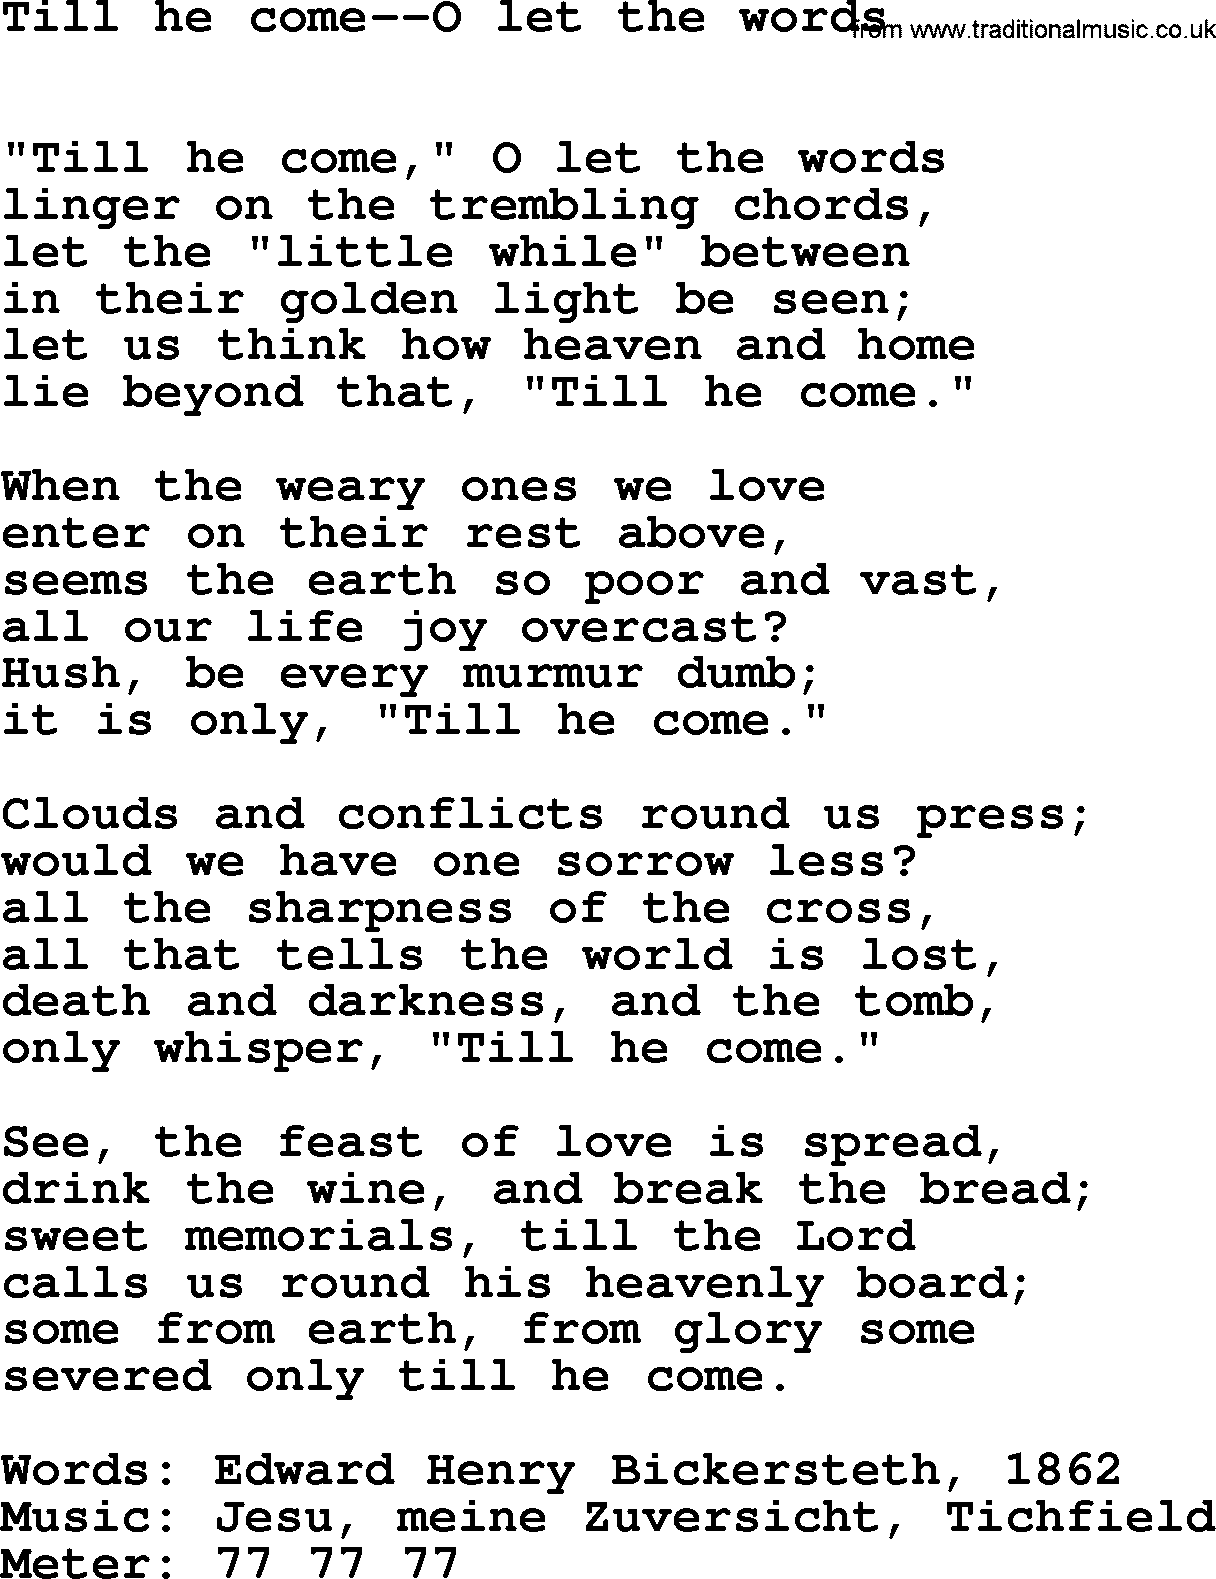 Book of Common Praise Hymn: Till He Come--O Let The Words.txt lyrics with midi music